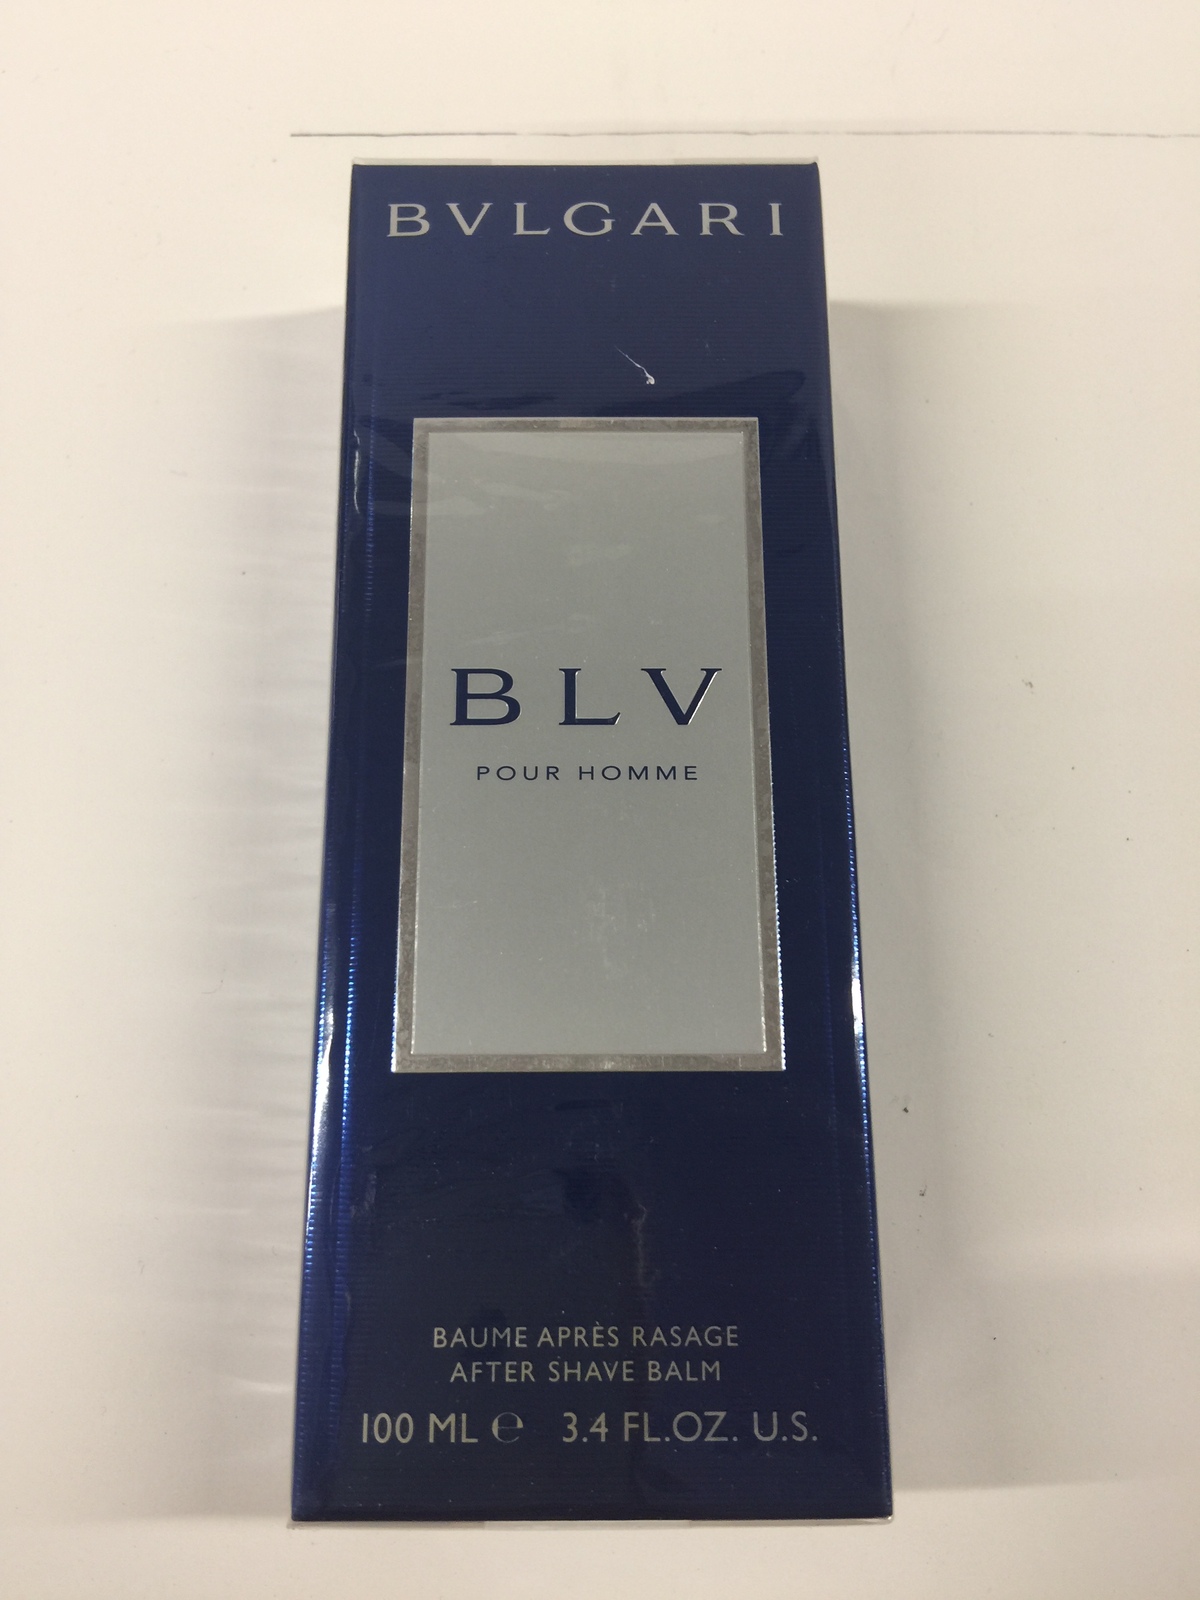 Bvlgari BLV Pour Homme After Shave Balm 100 ml/3.4 fl oz- new in navy box - $39.99